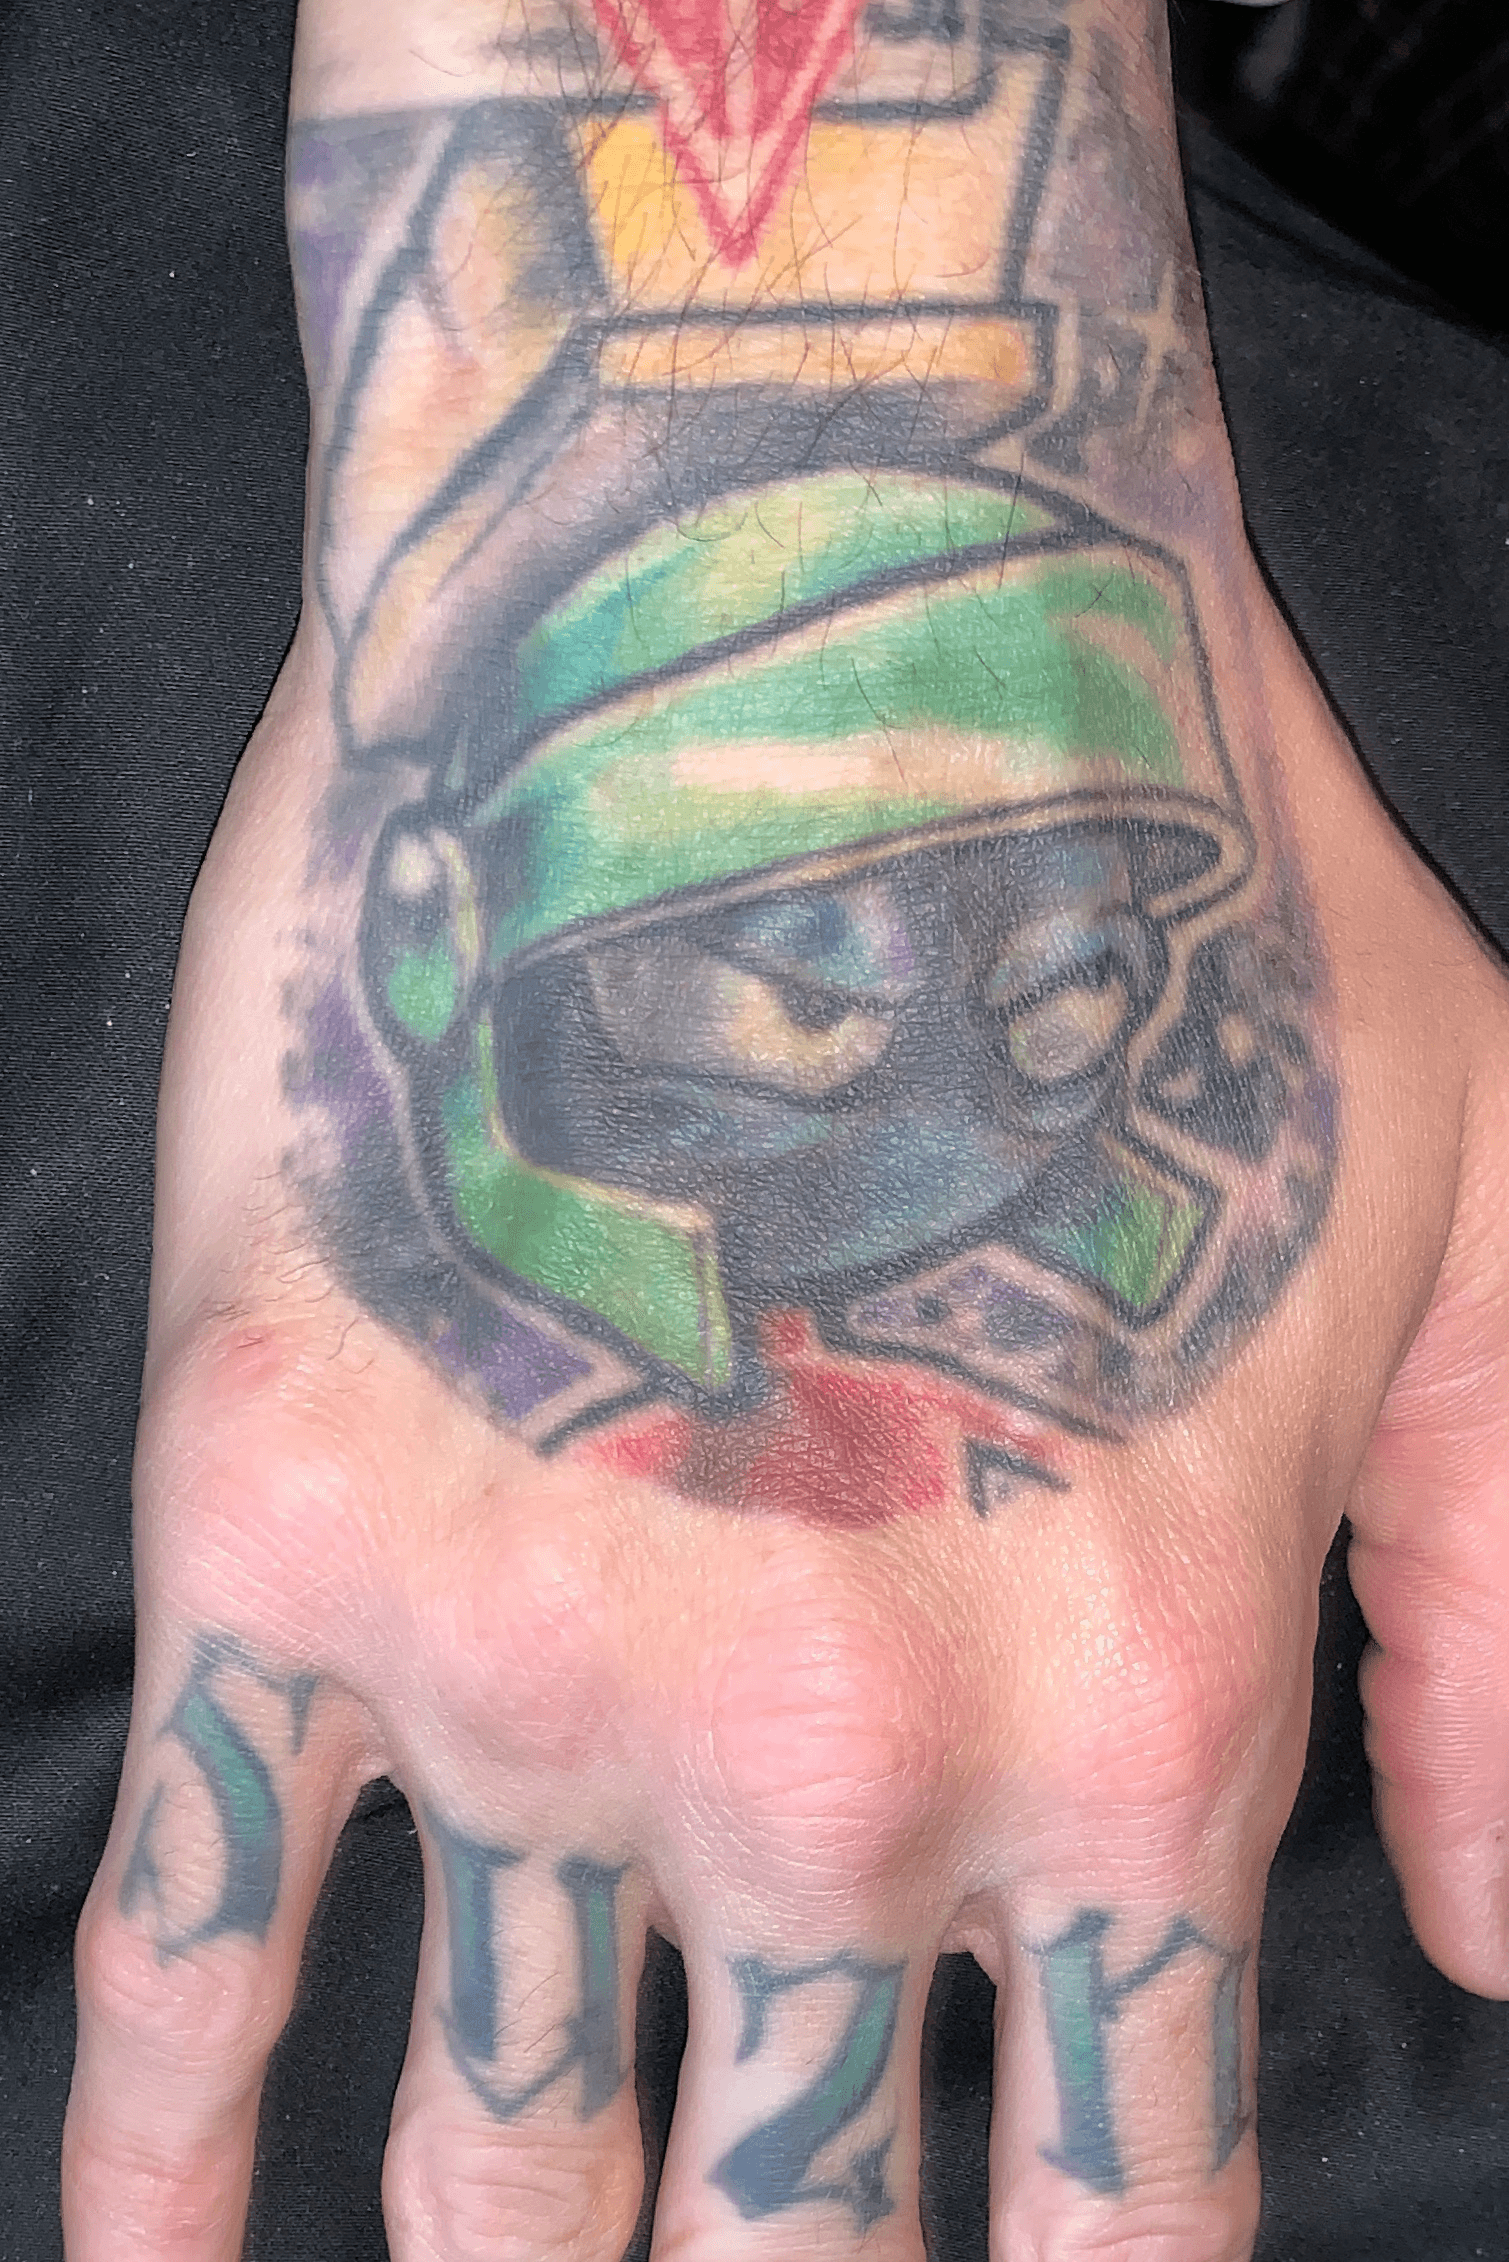 Marvin the Martian Tattoo  a photo on Flickriver